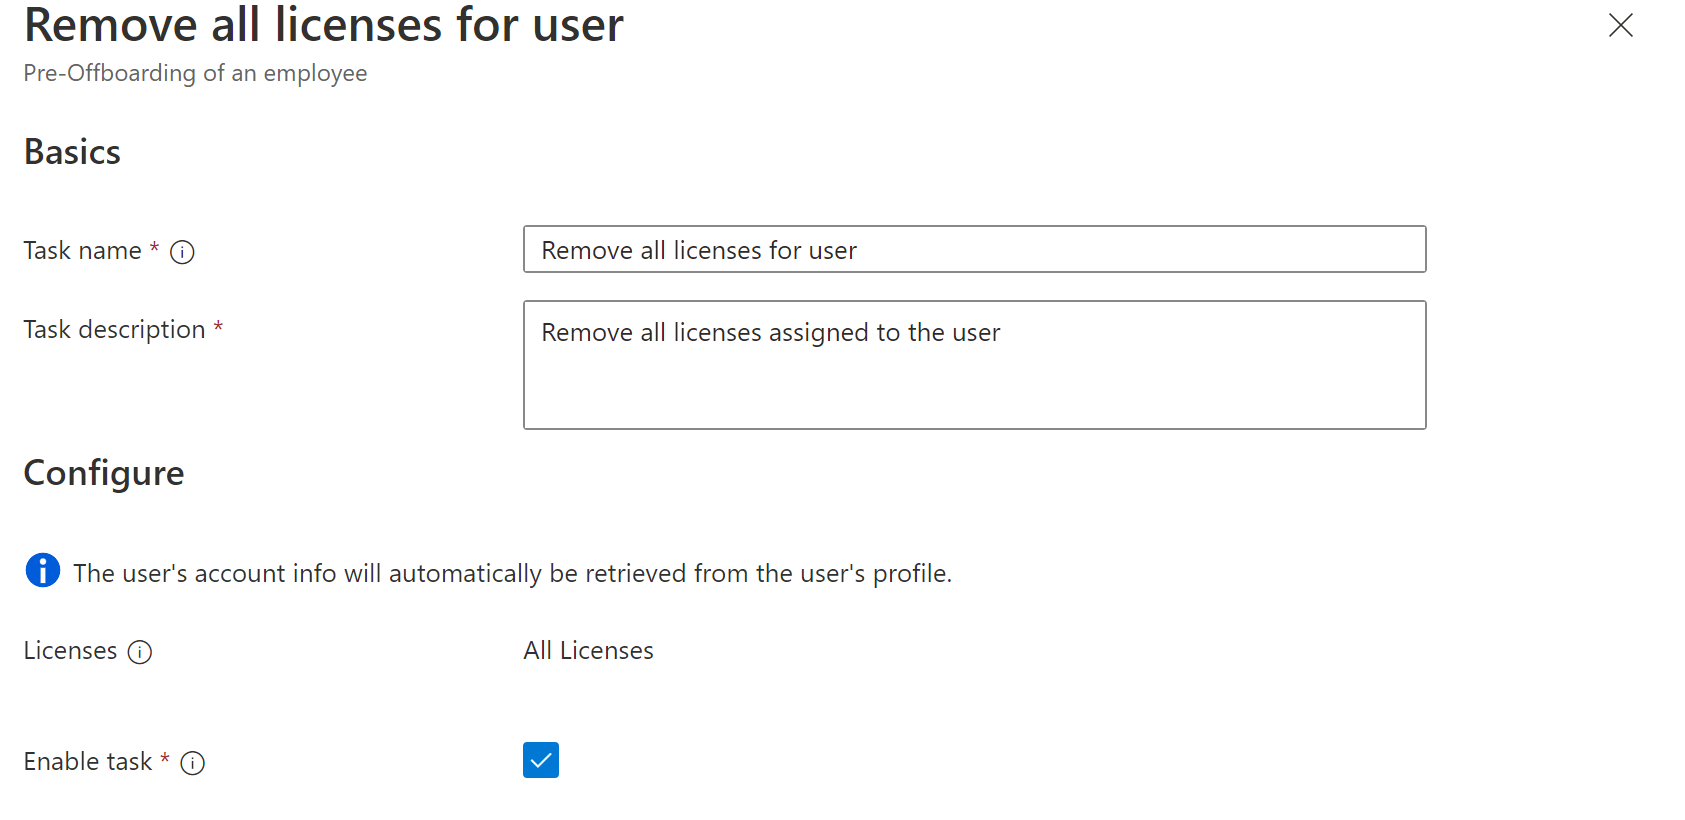 Screenshot of Workflows task: remove all licenses from users.